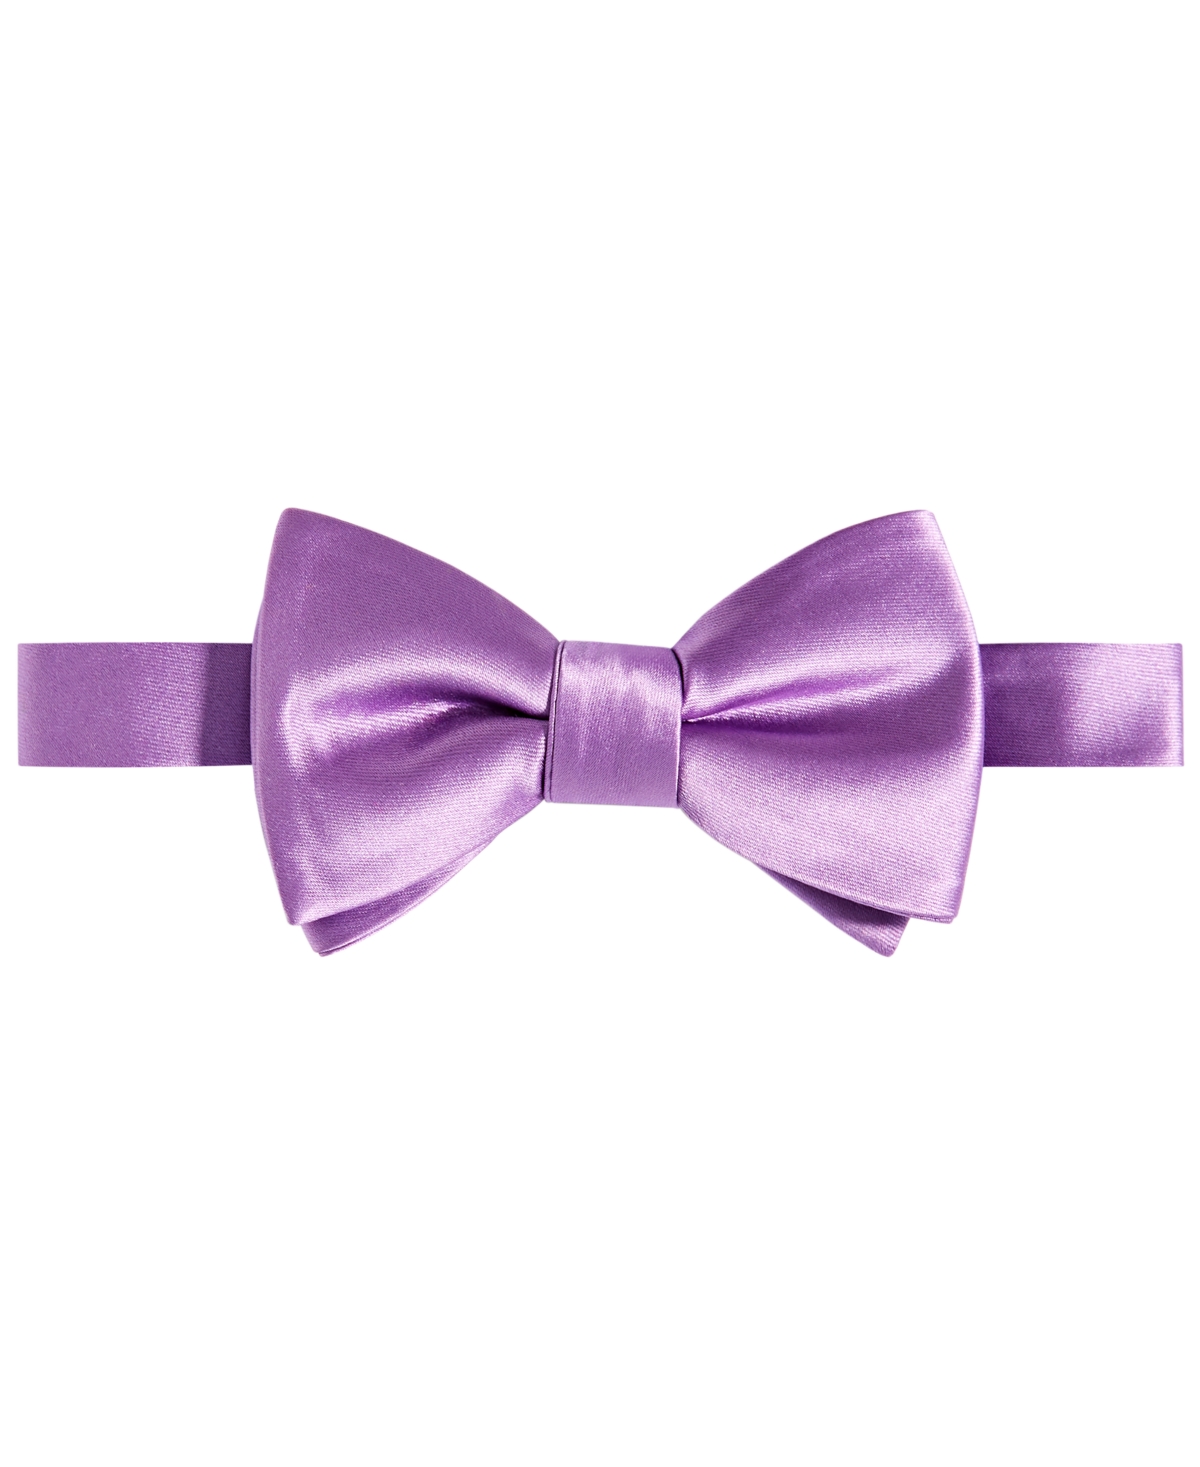 Men's Purple & Gold Solid Bow Tie - Yellow